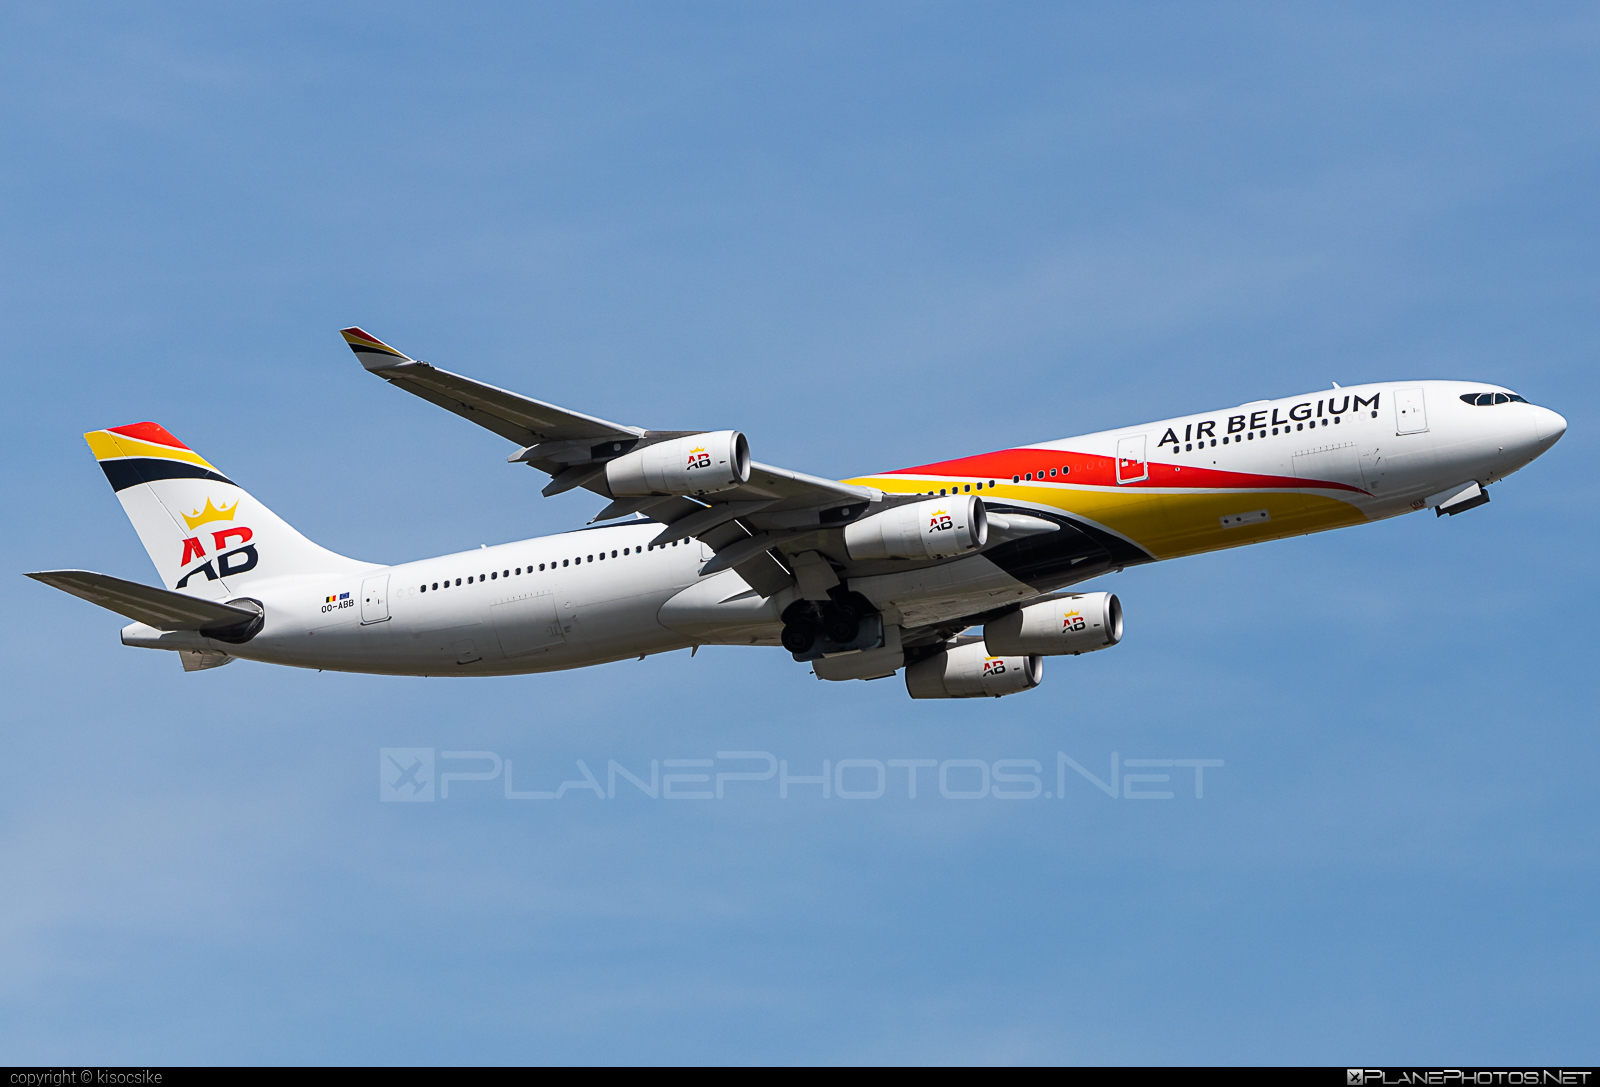 Airbus A340-313 - OO-ABB operated by Air Belgium #a340 #a340family #airbelgium #airbus #airbus340